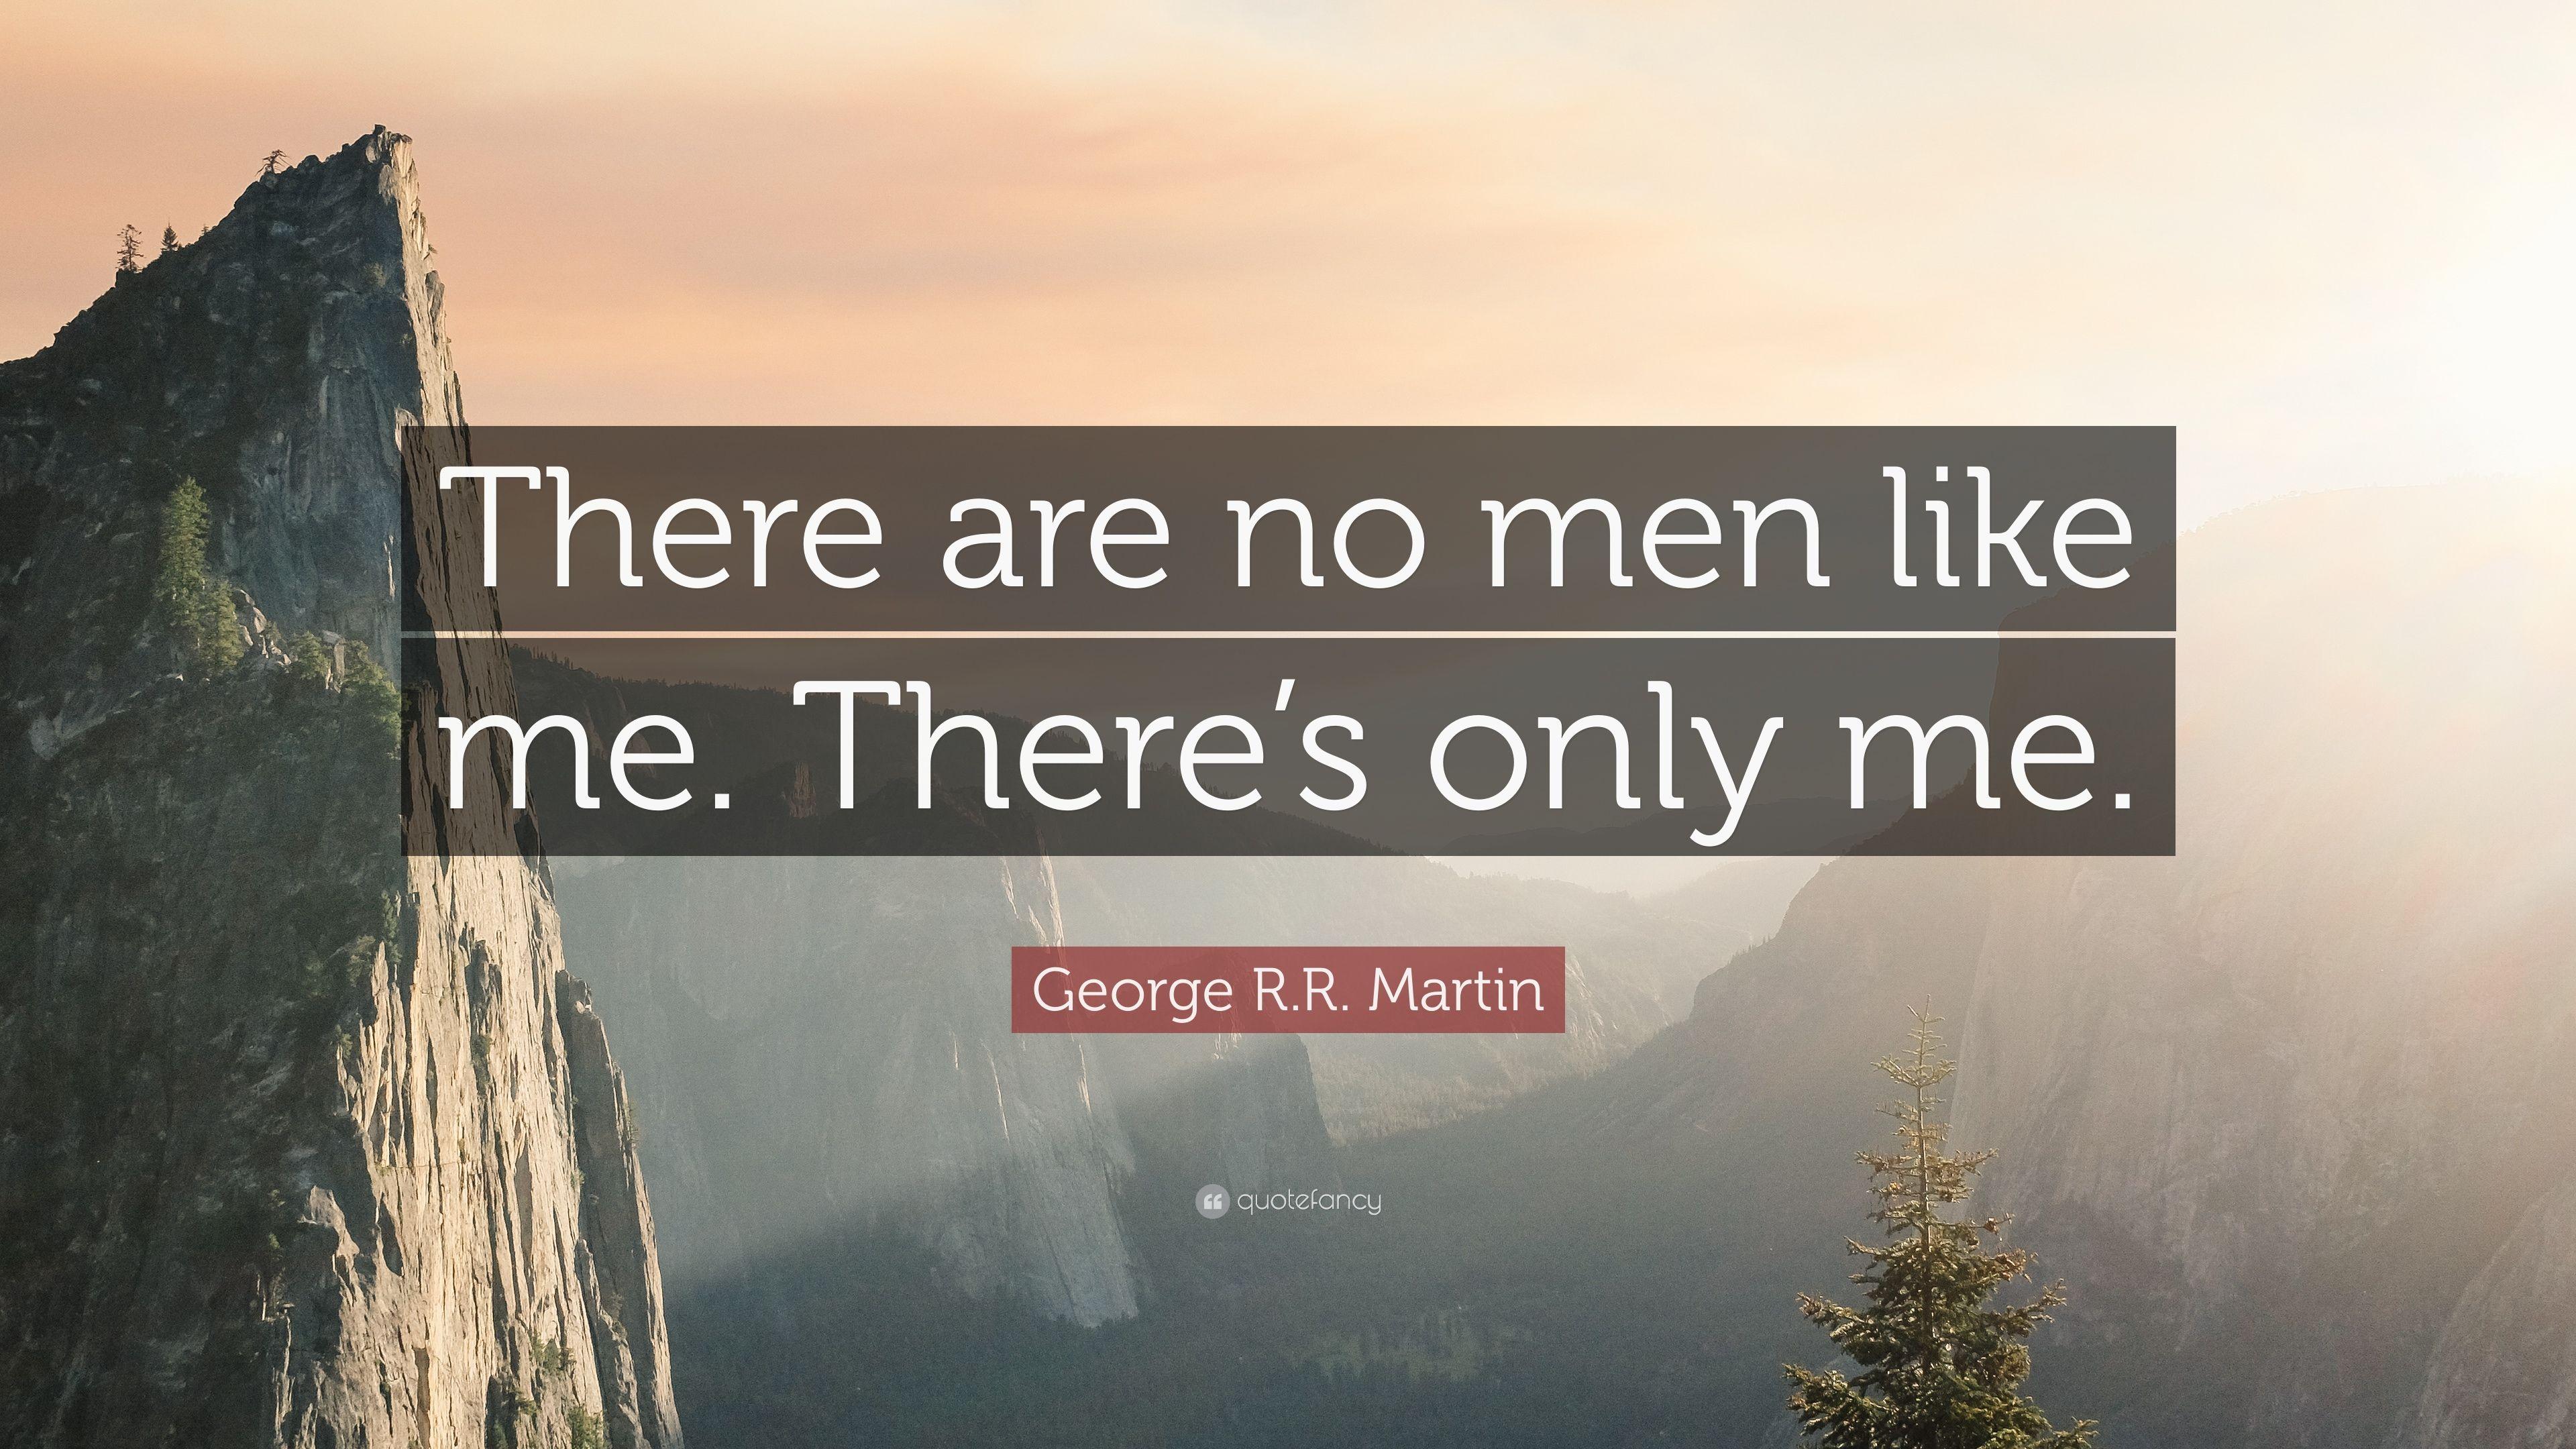 George R.R. Martin Quote: “There are no men like me. There's only me